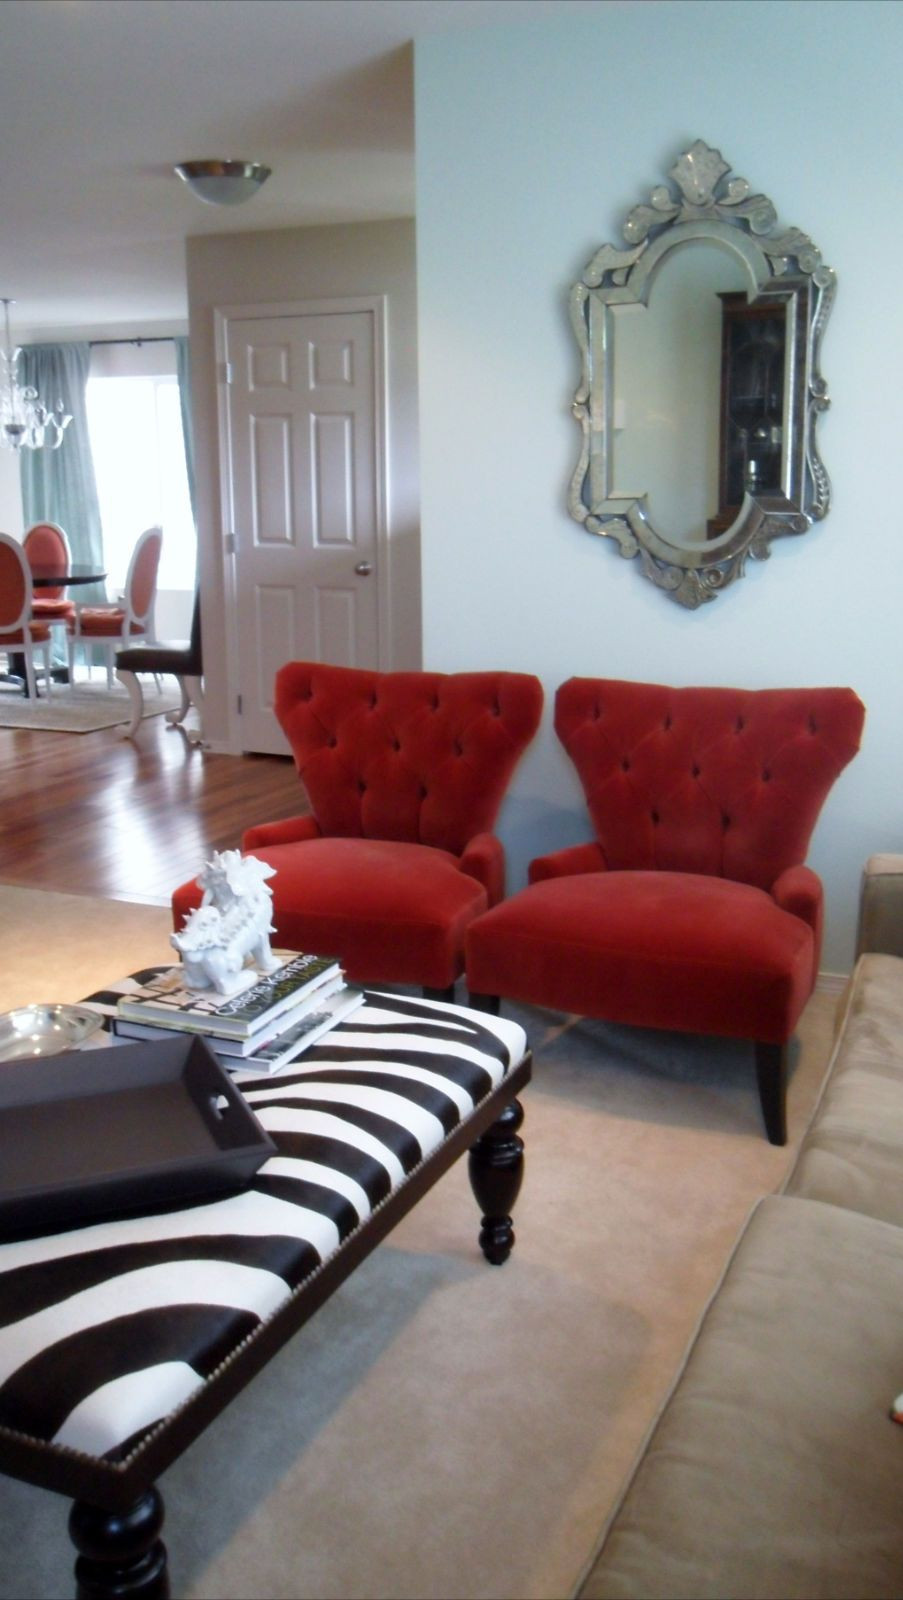 Red Living Room Chair
 living room love the zebra print and red accent chairs